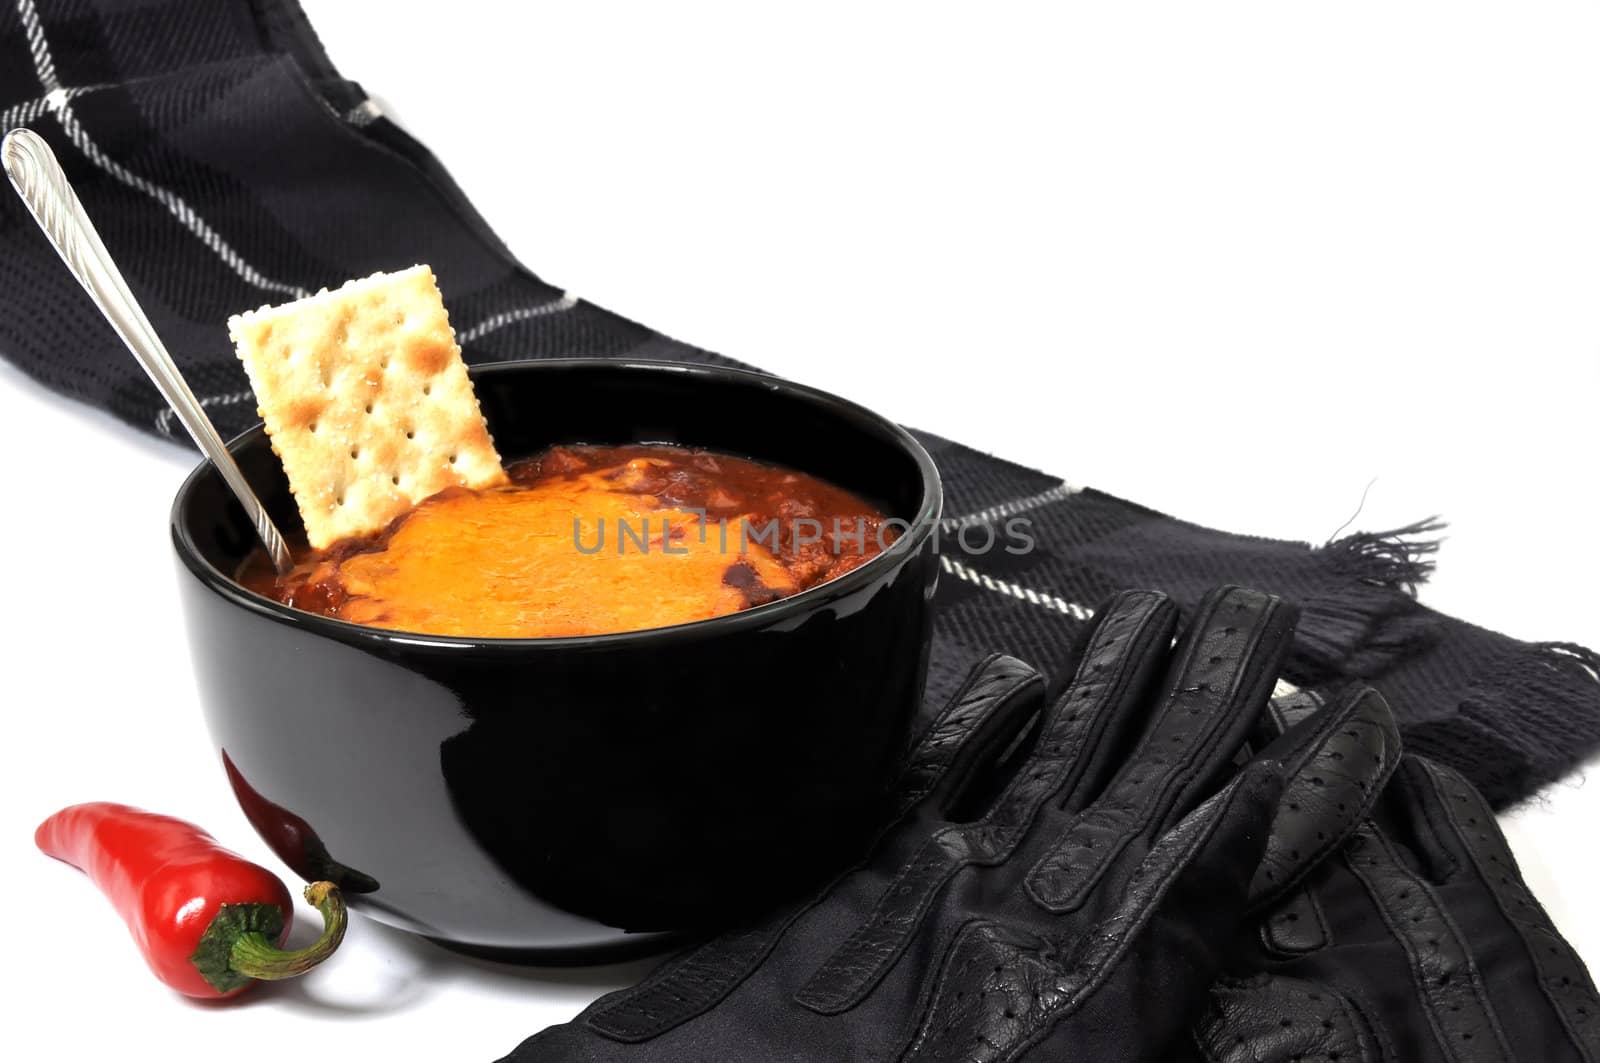 Bowl of chili with melted cheese, cracker, red cayenne pepper, spoon, scarf, and gloves.  Isolated on white background.